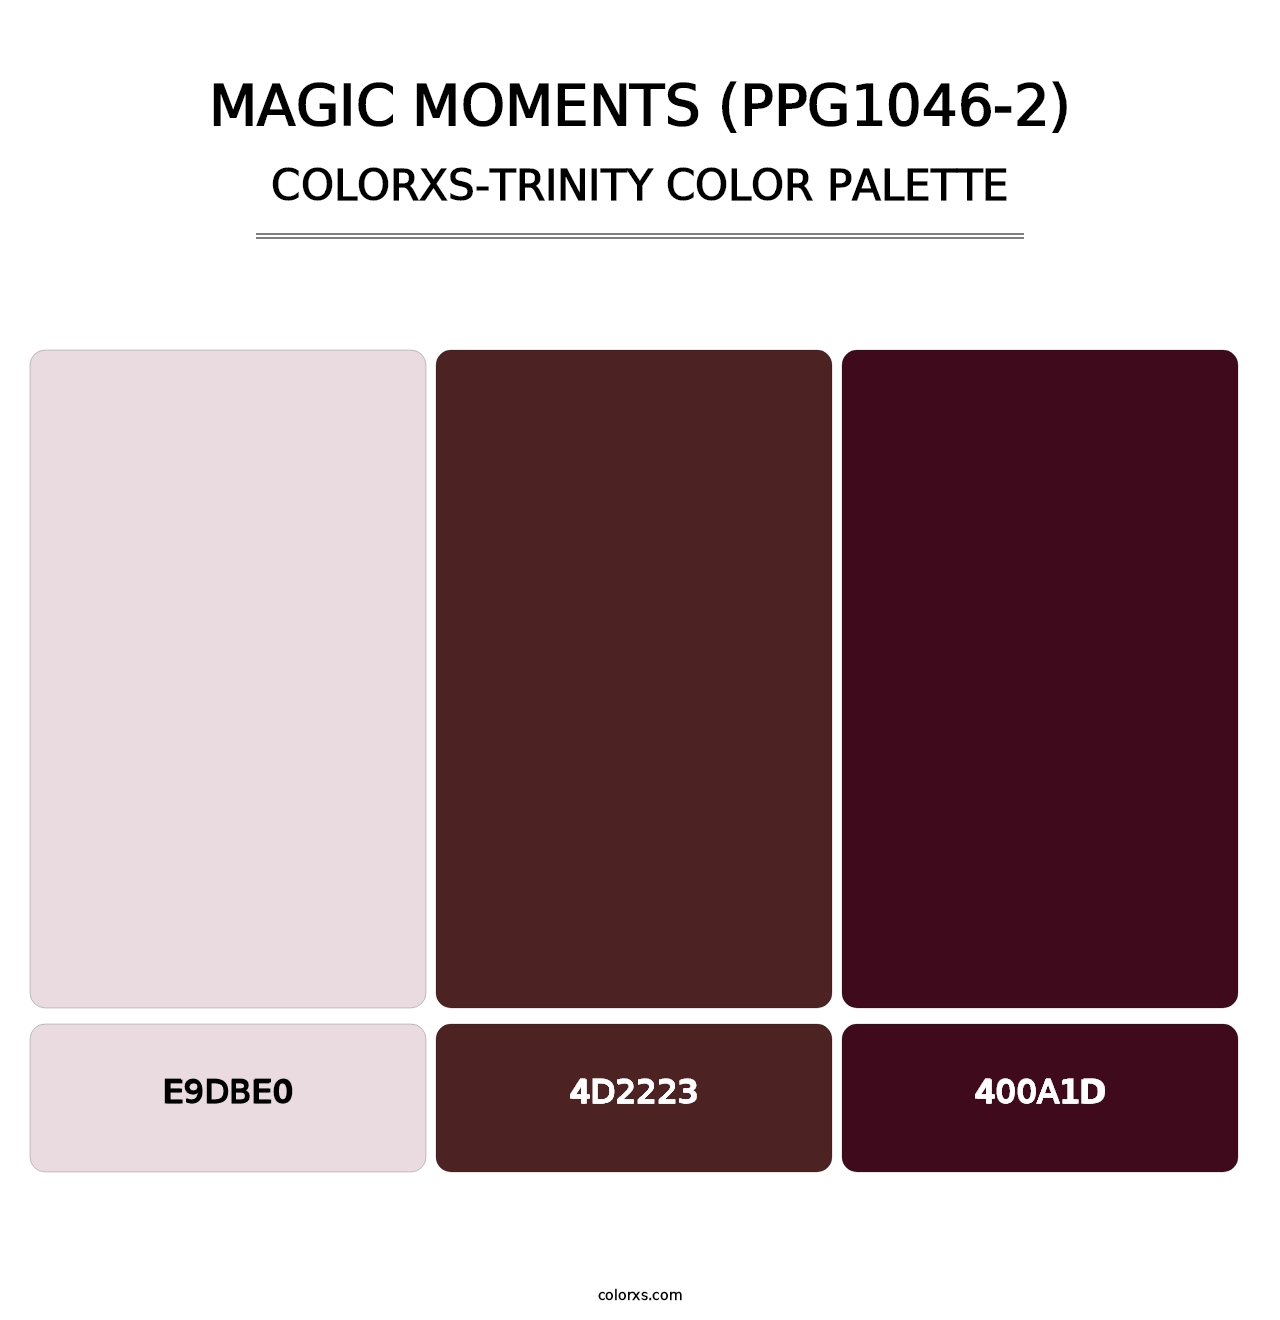 Magic Moments (PPG1046-2) - Colorxs Trinity Palette